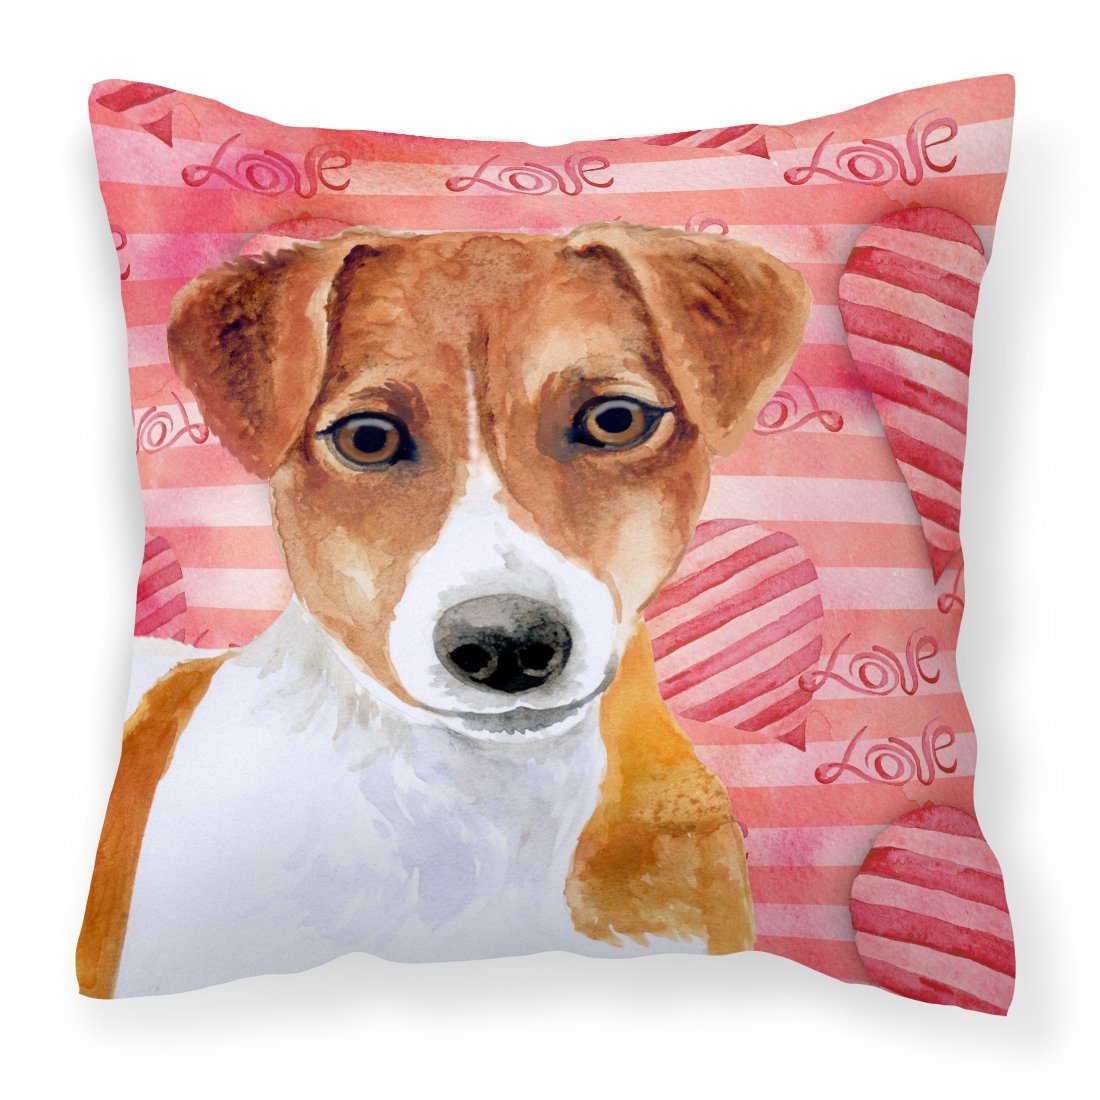 Jack Russell Terrier Love Fabric Decorative Pillow BB9776PW1818 by Caroline's Treasures